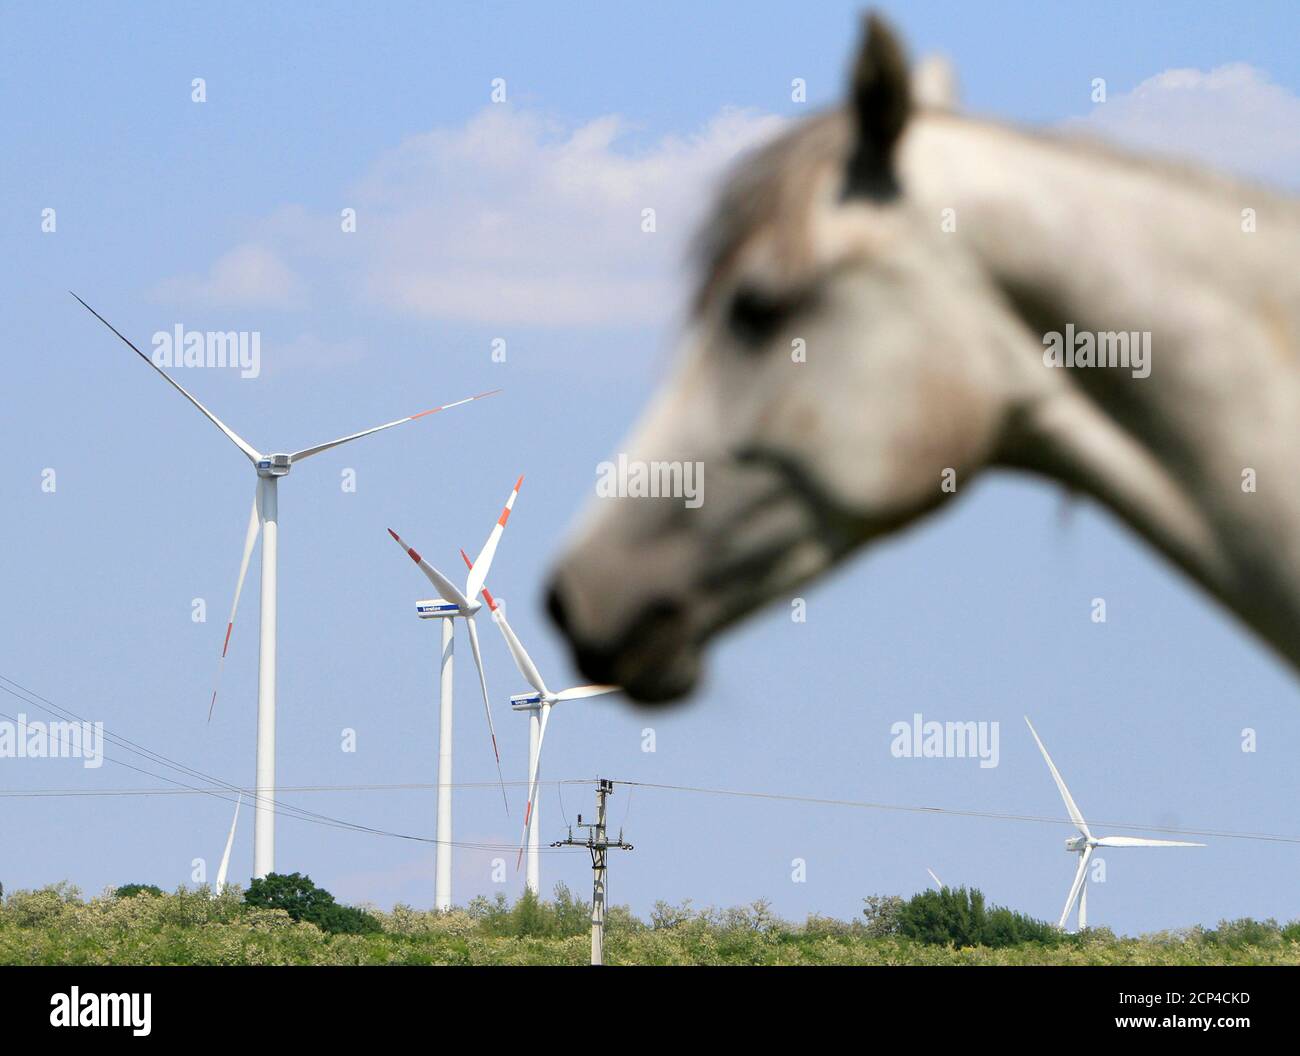 A horse is seen in front of wind turbines in a wind farm near the town of Babolna,100 km (62 miles) west Budapest May 18, 2011. There are about 160 wind turbines operating in the flatlands of Hungary with most of them in the northwestern areas.    REUTERS/Bernadett Szabo  (HUNGARY - Tags: SOCIETY ANIMALS) Stock Photo